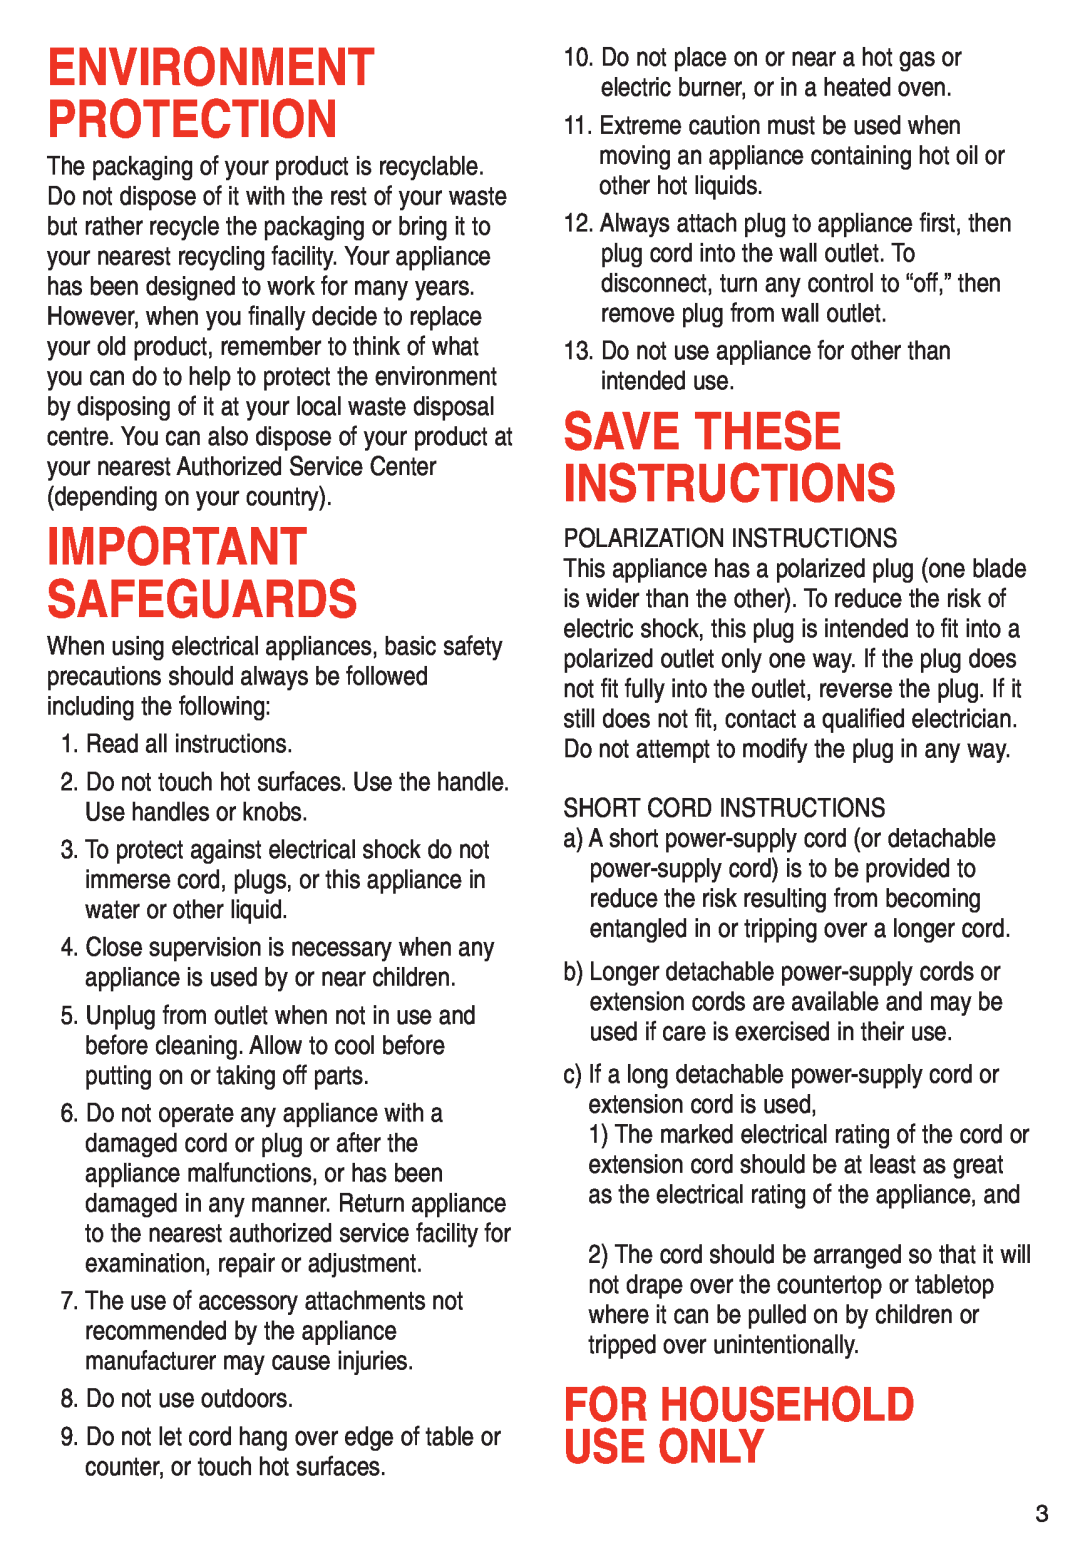 T-Fal Steamer manual Environment Protection, Safeguards, Save These Instructions, For Household Use Only 